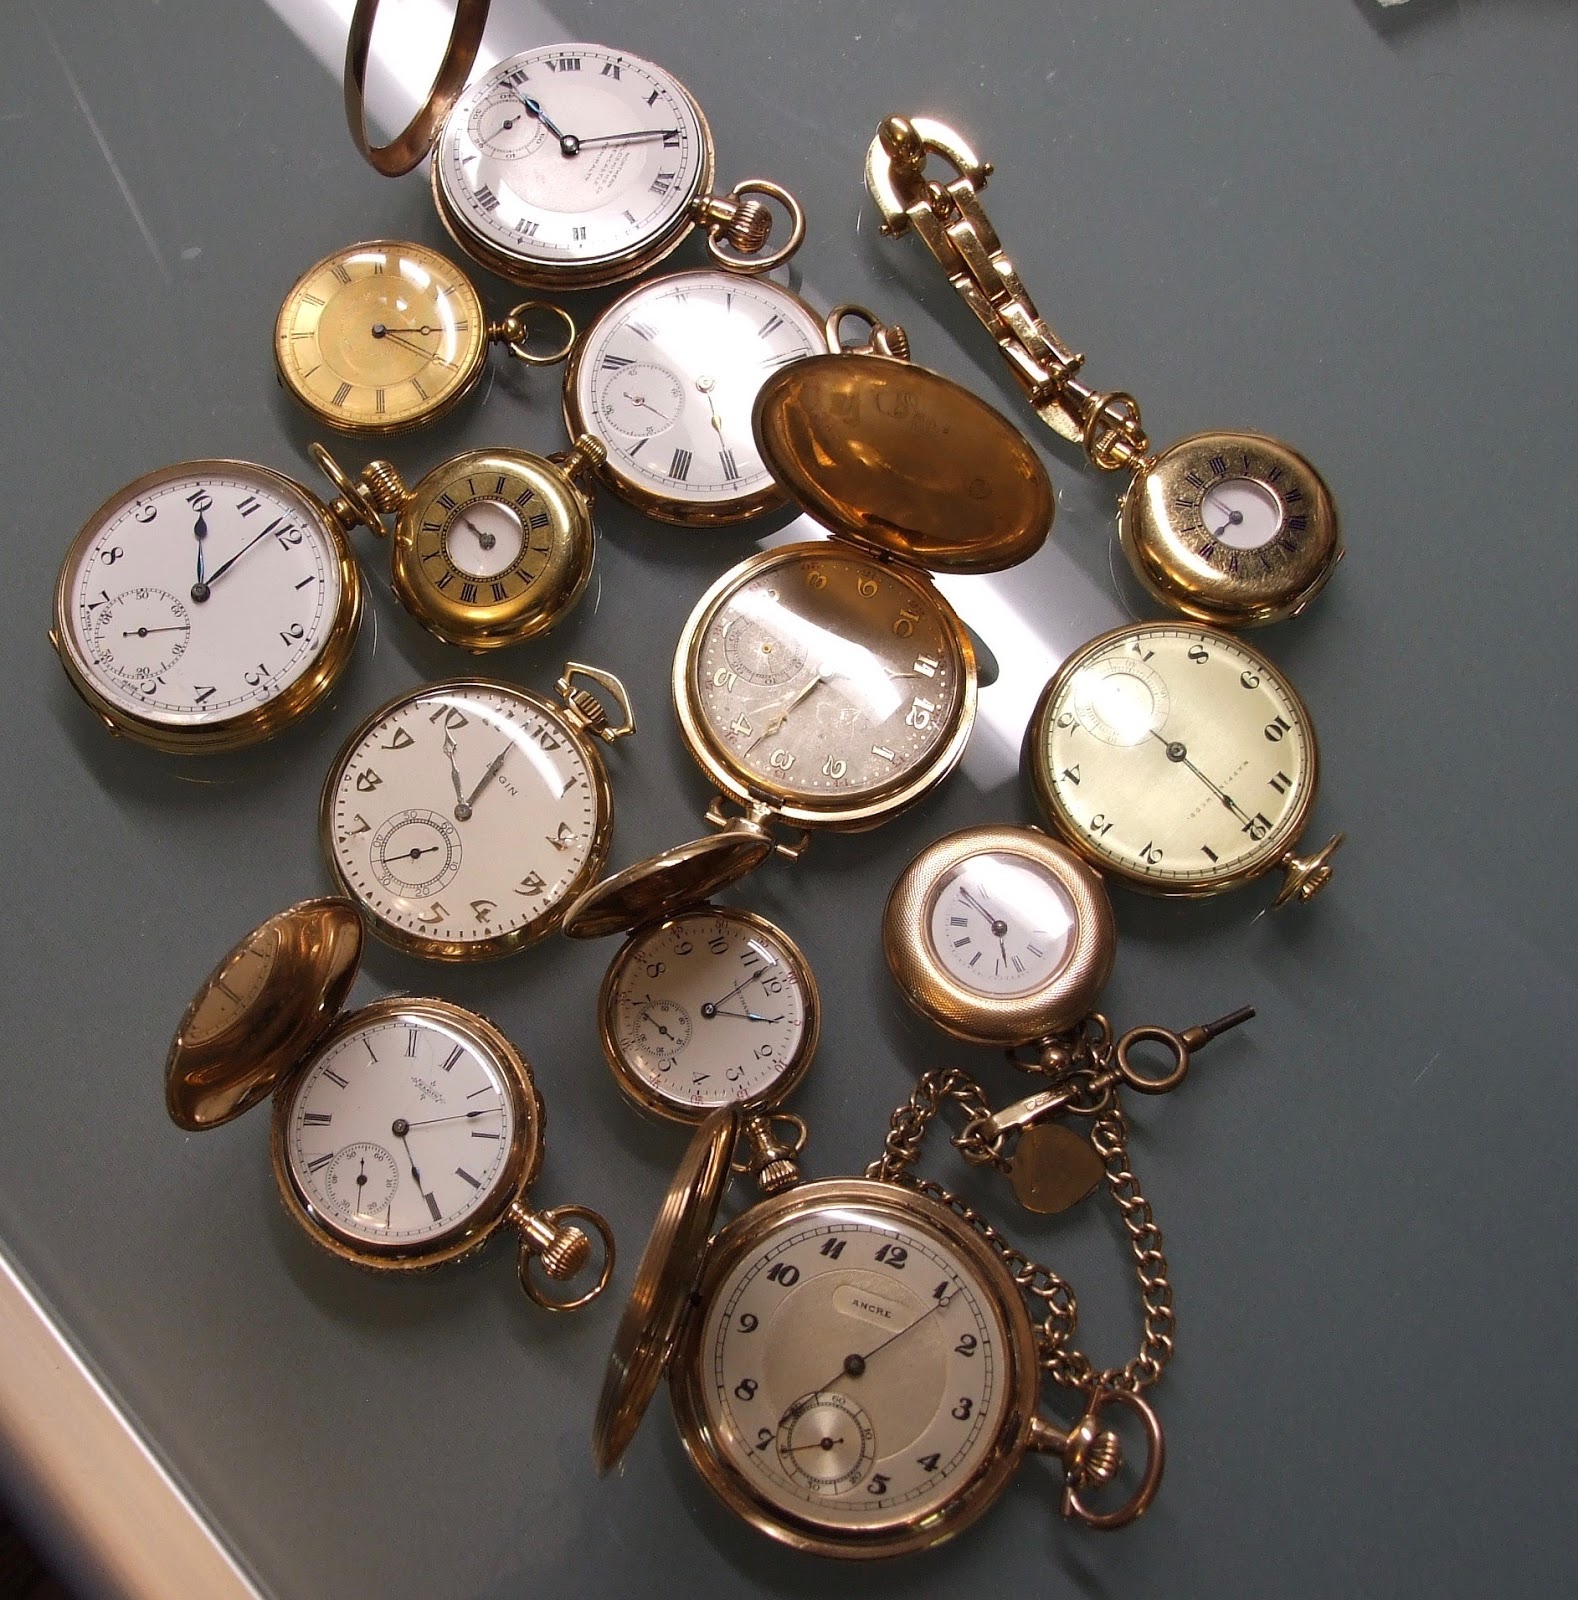 Maurice Ltd. Watch Swap Cafe: Antique Pocket Watches Wanted To Buy ...